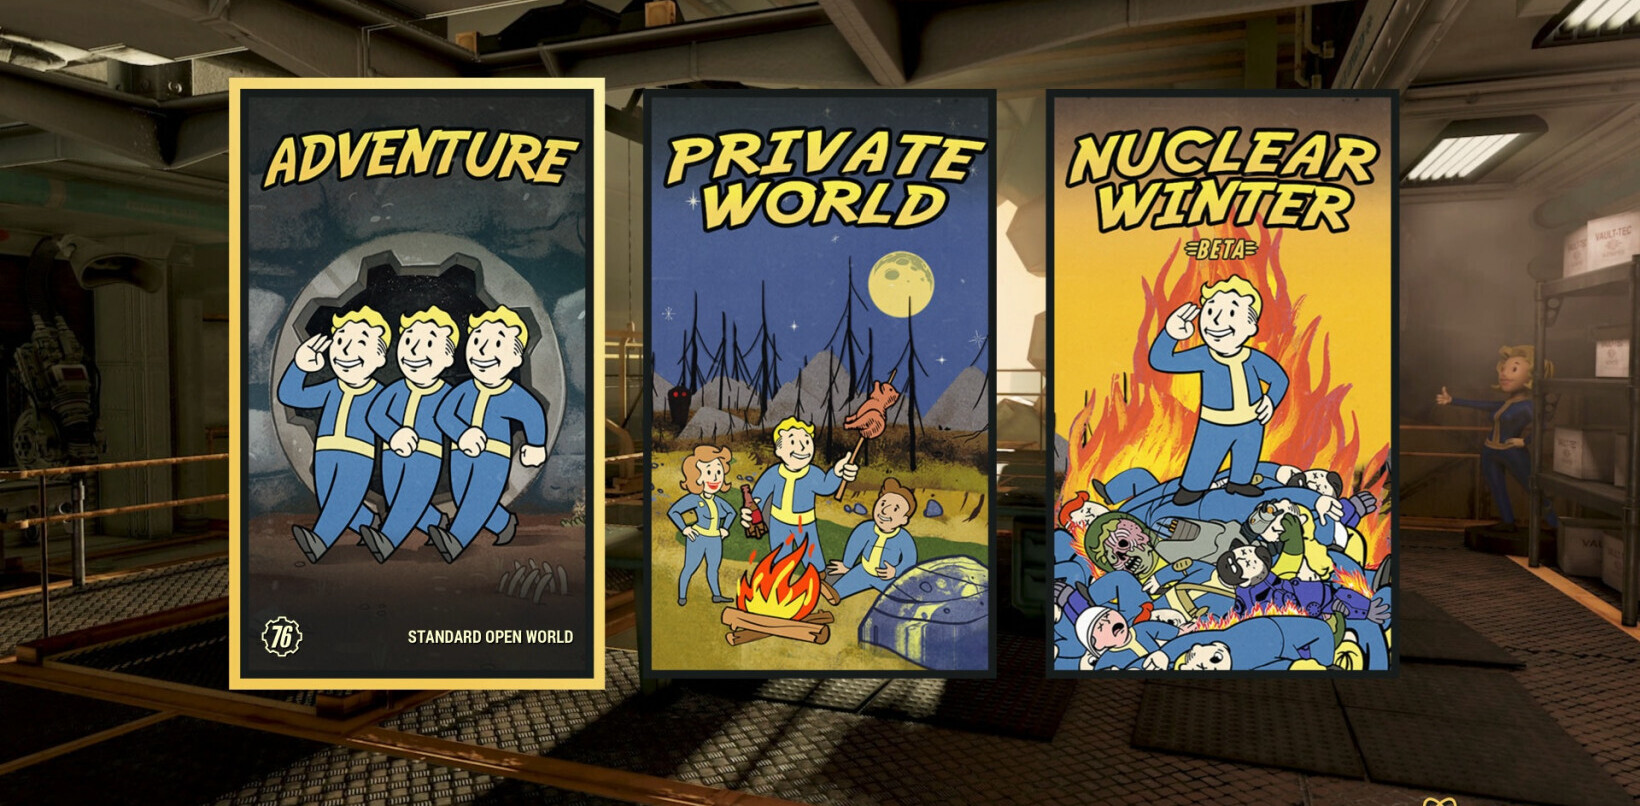 Fallout 76 on private servers is the quarantine gaming experience I deserve